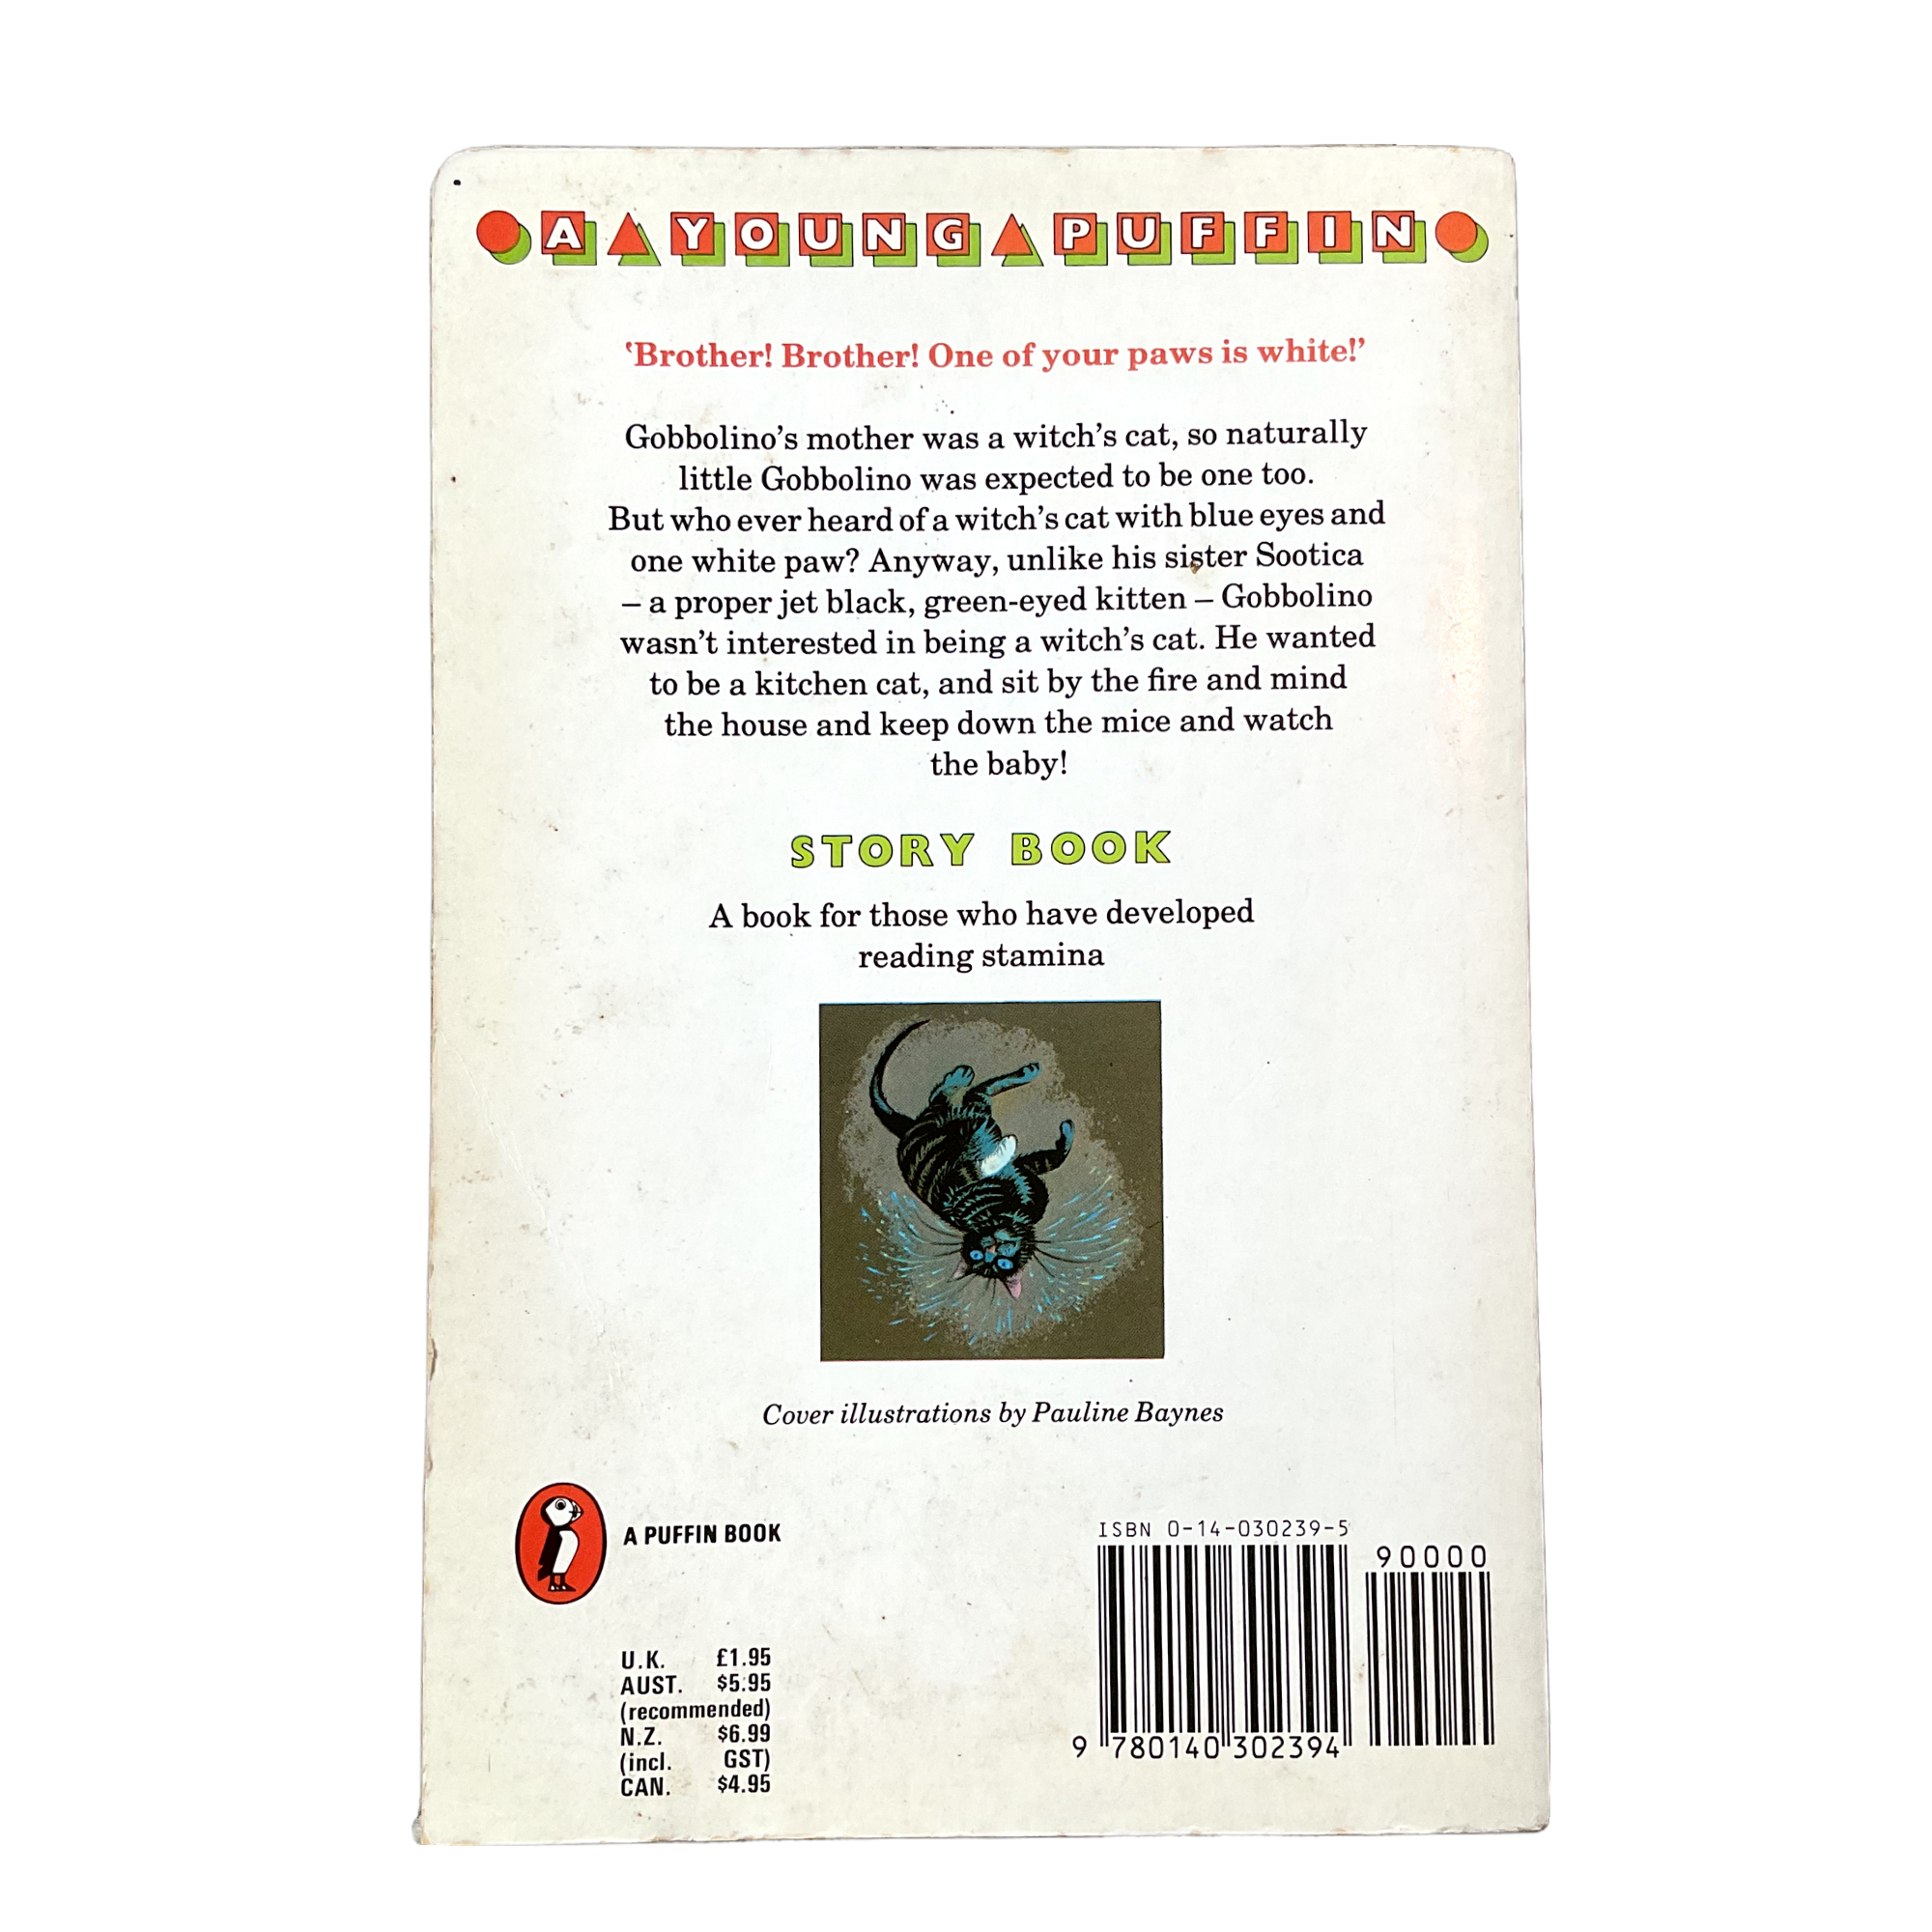 Gobbolino the Witch’s Cat - Paperback